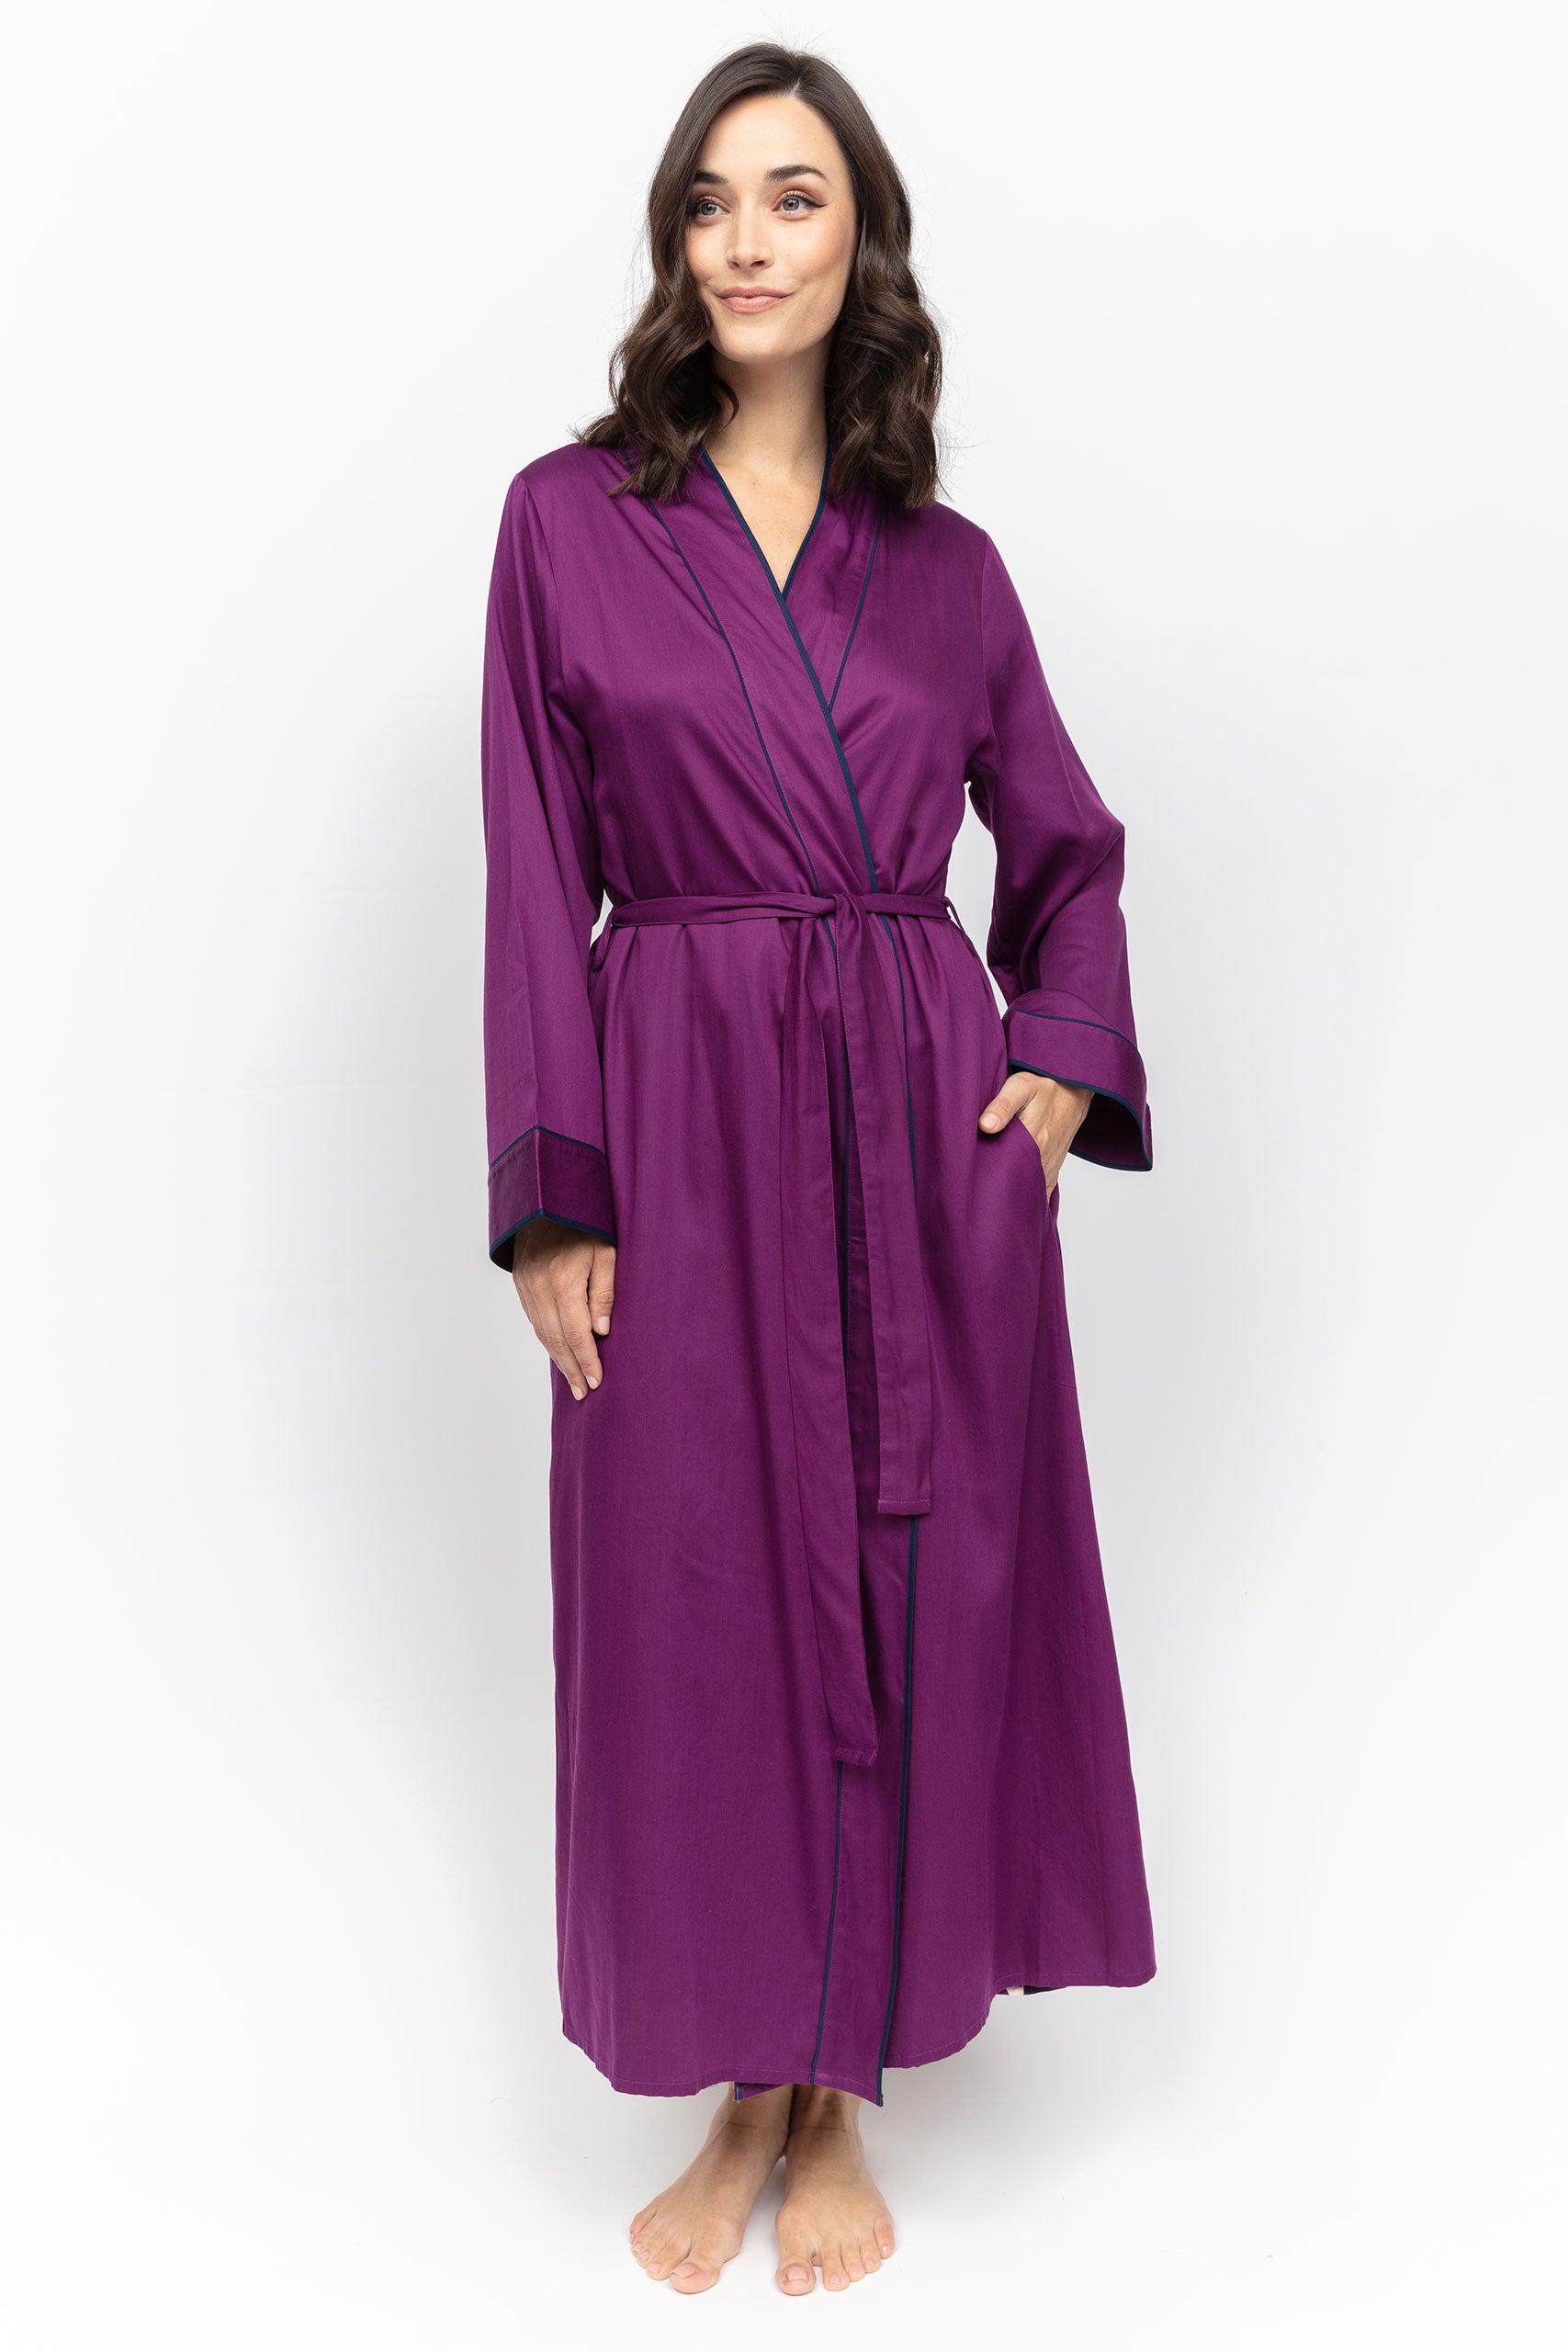 Southbank Magenta Long Dressing Gown